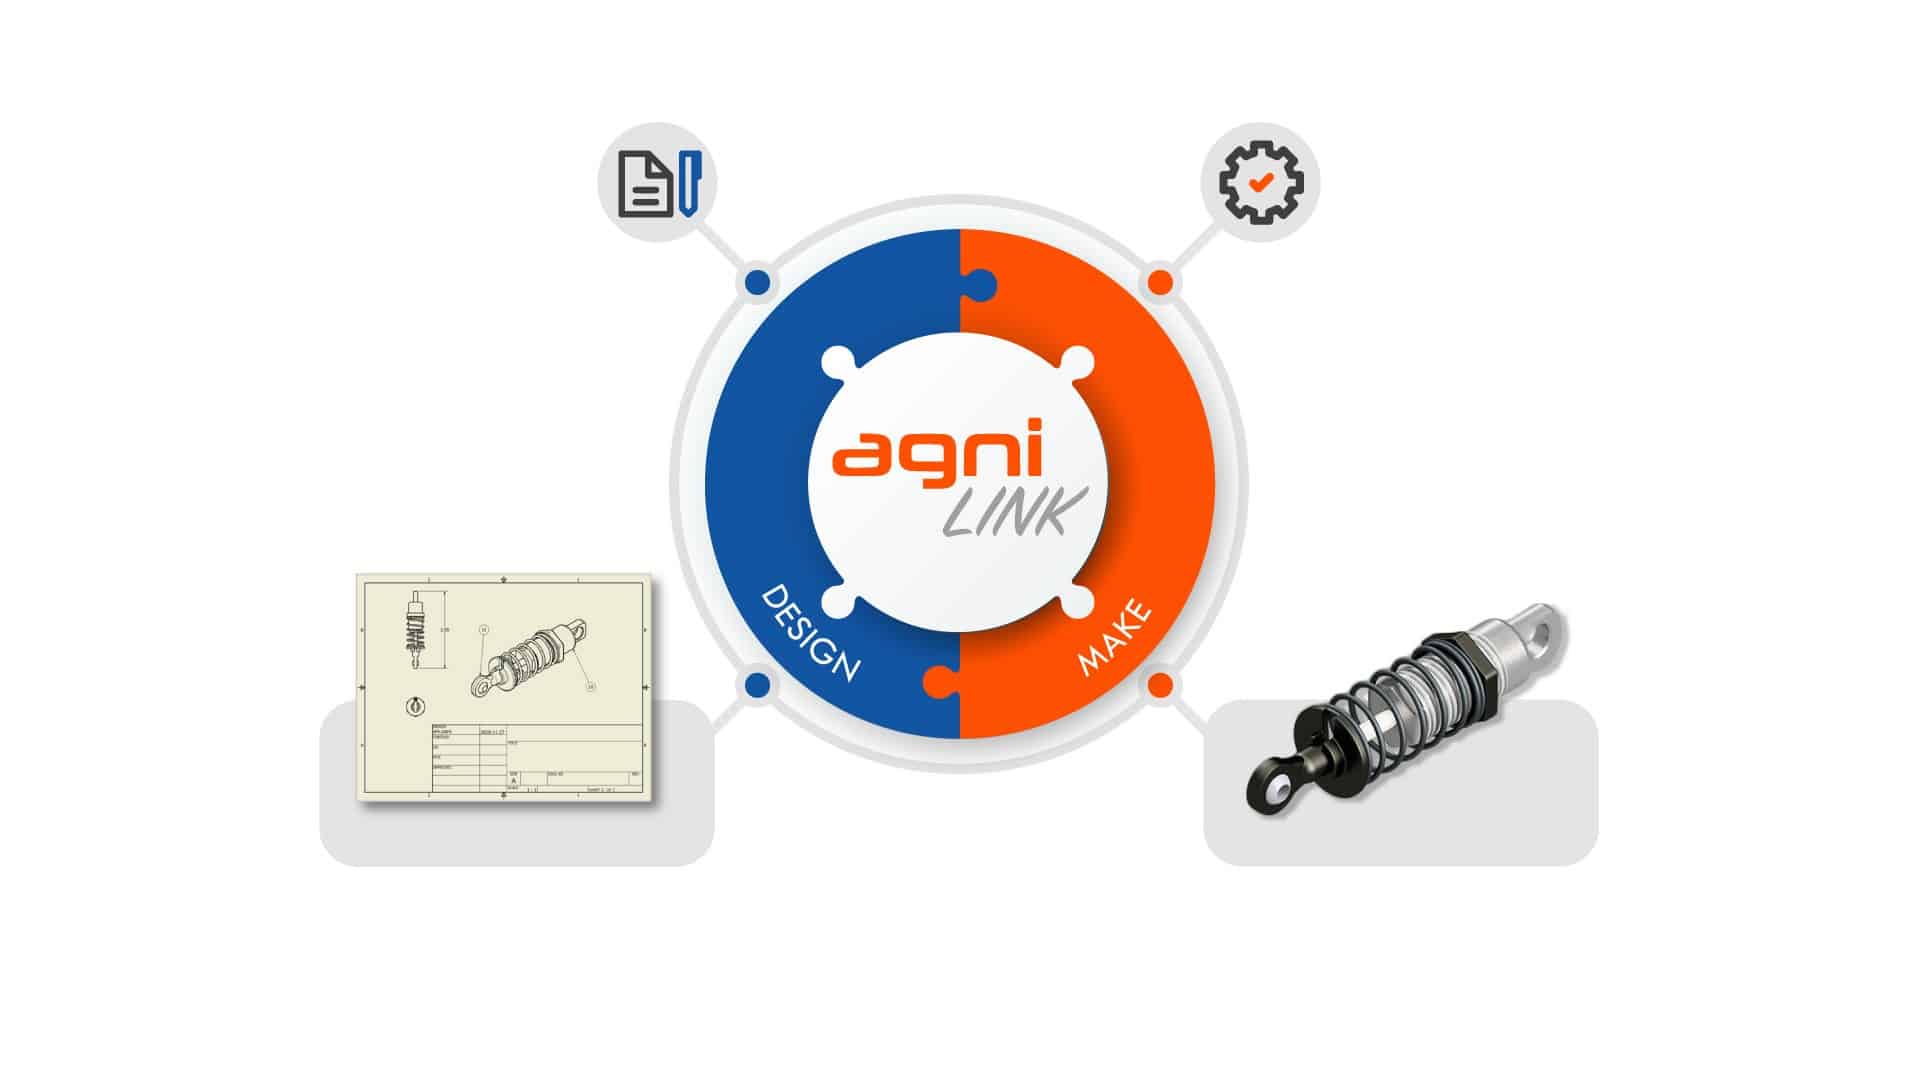 Agni Link enables real-time data transfer from CAD, PDM and PLM to ERP systems